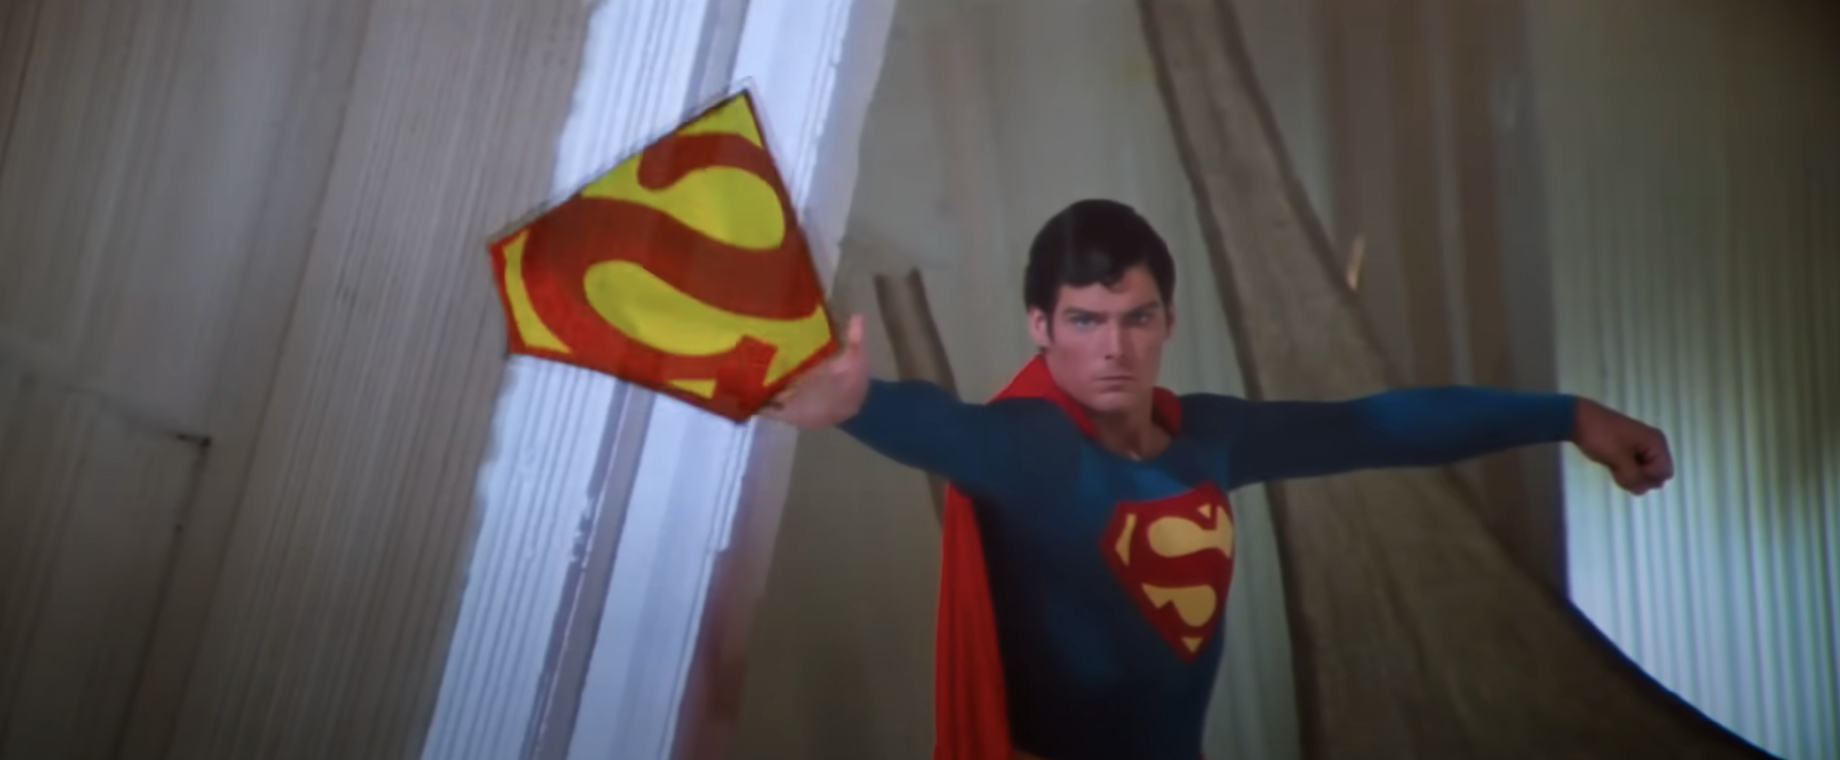 Christopher Reeve as Superman throws his emblem in a scene from a Superman film